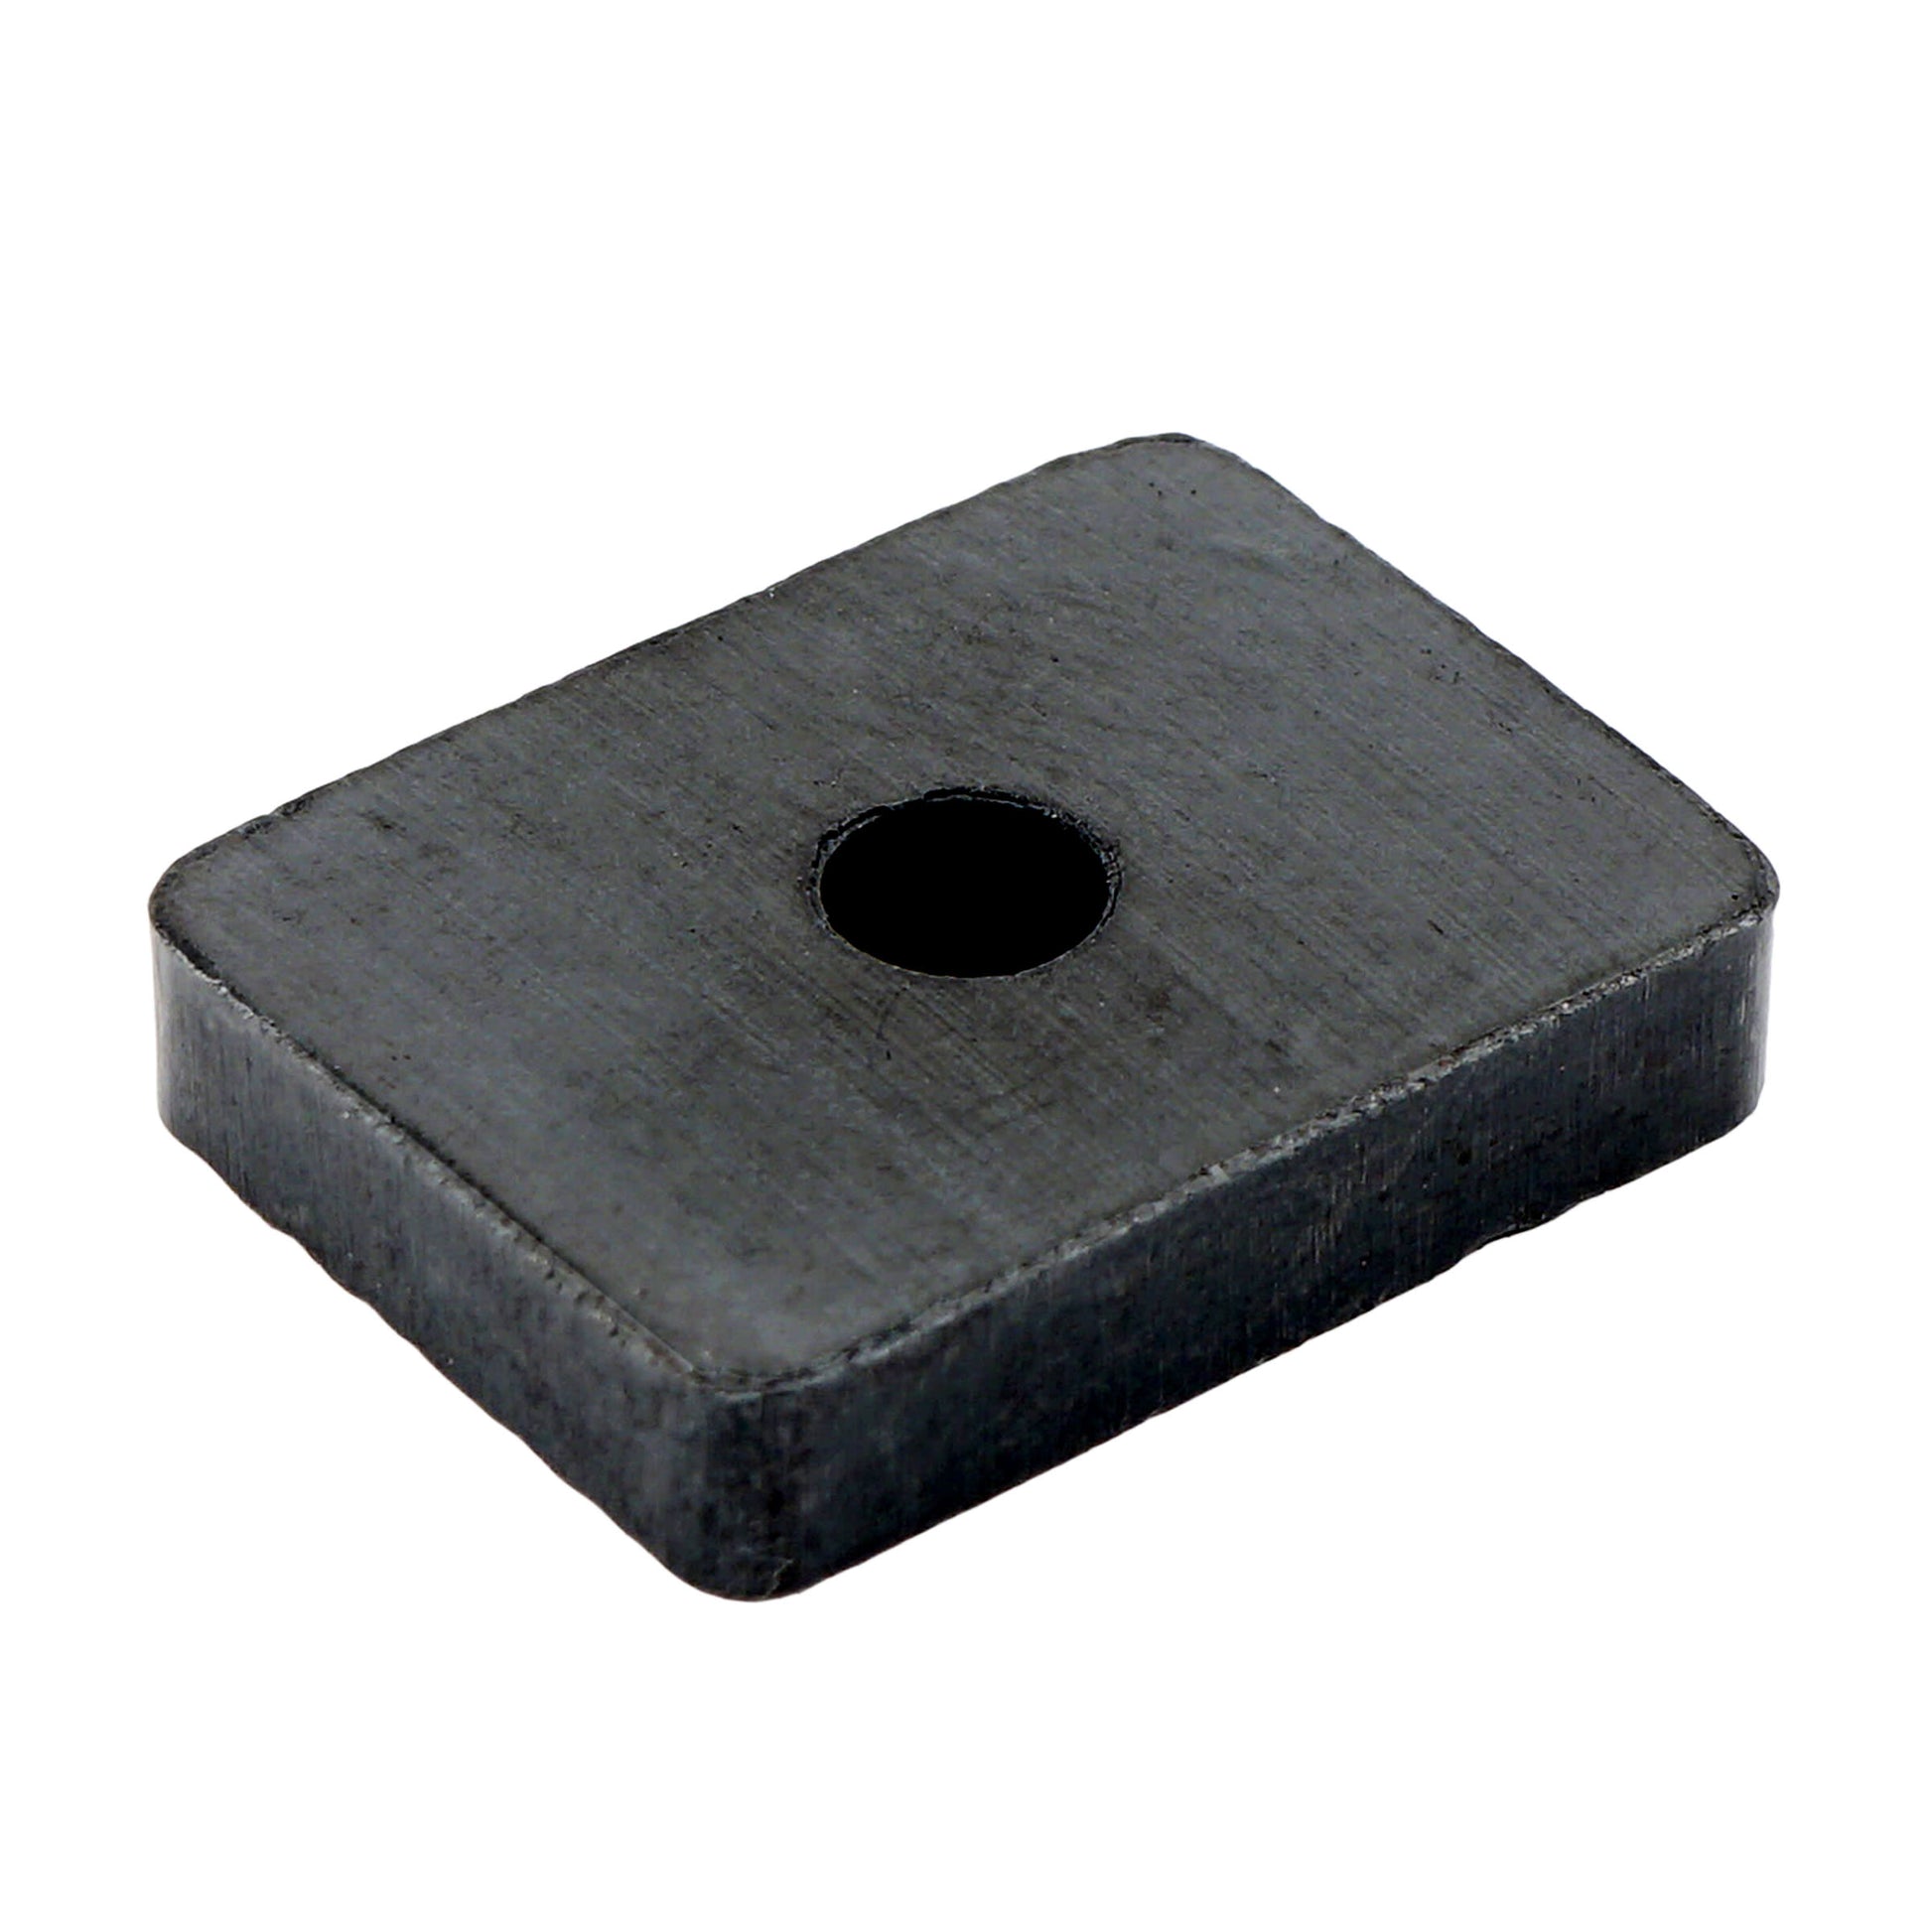 Load image into Gallery viewer, 07006 Ceramic Block Magnet - 45 Degree Angle View